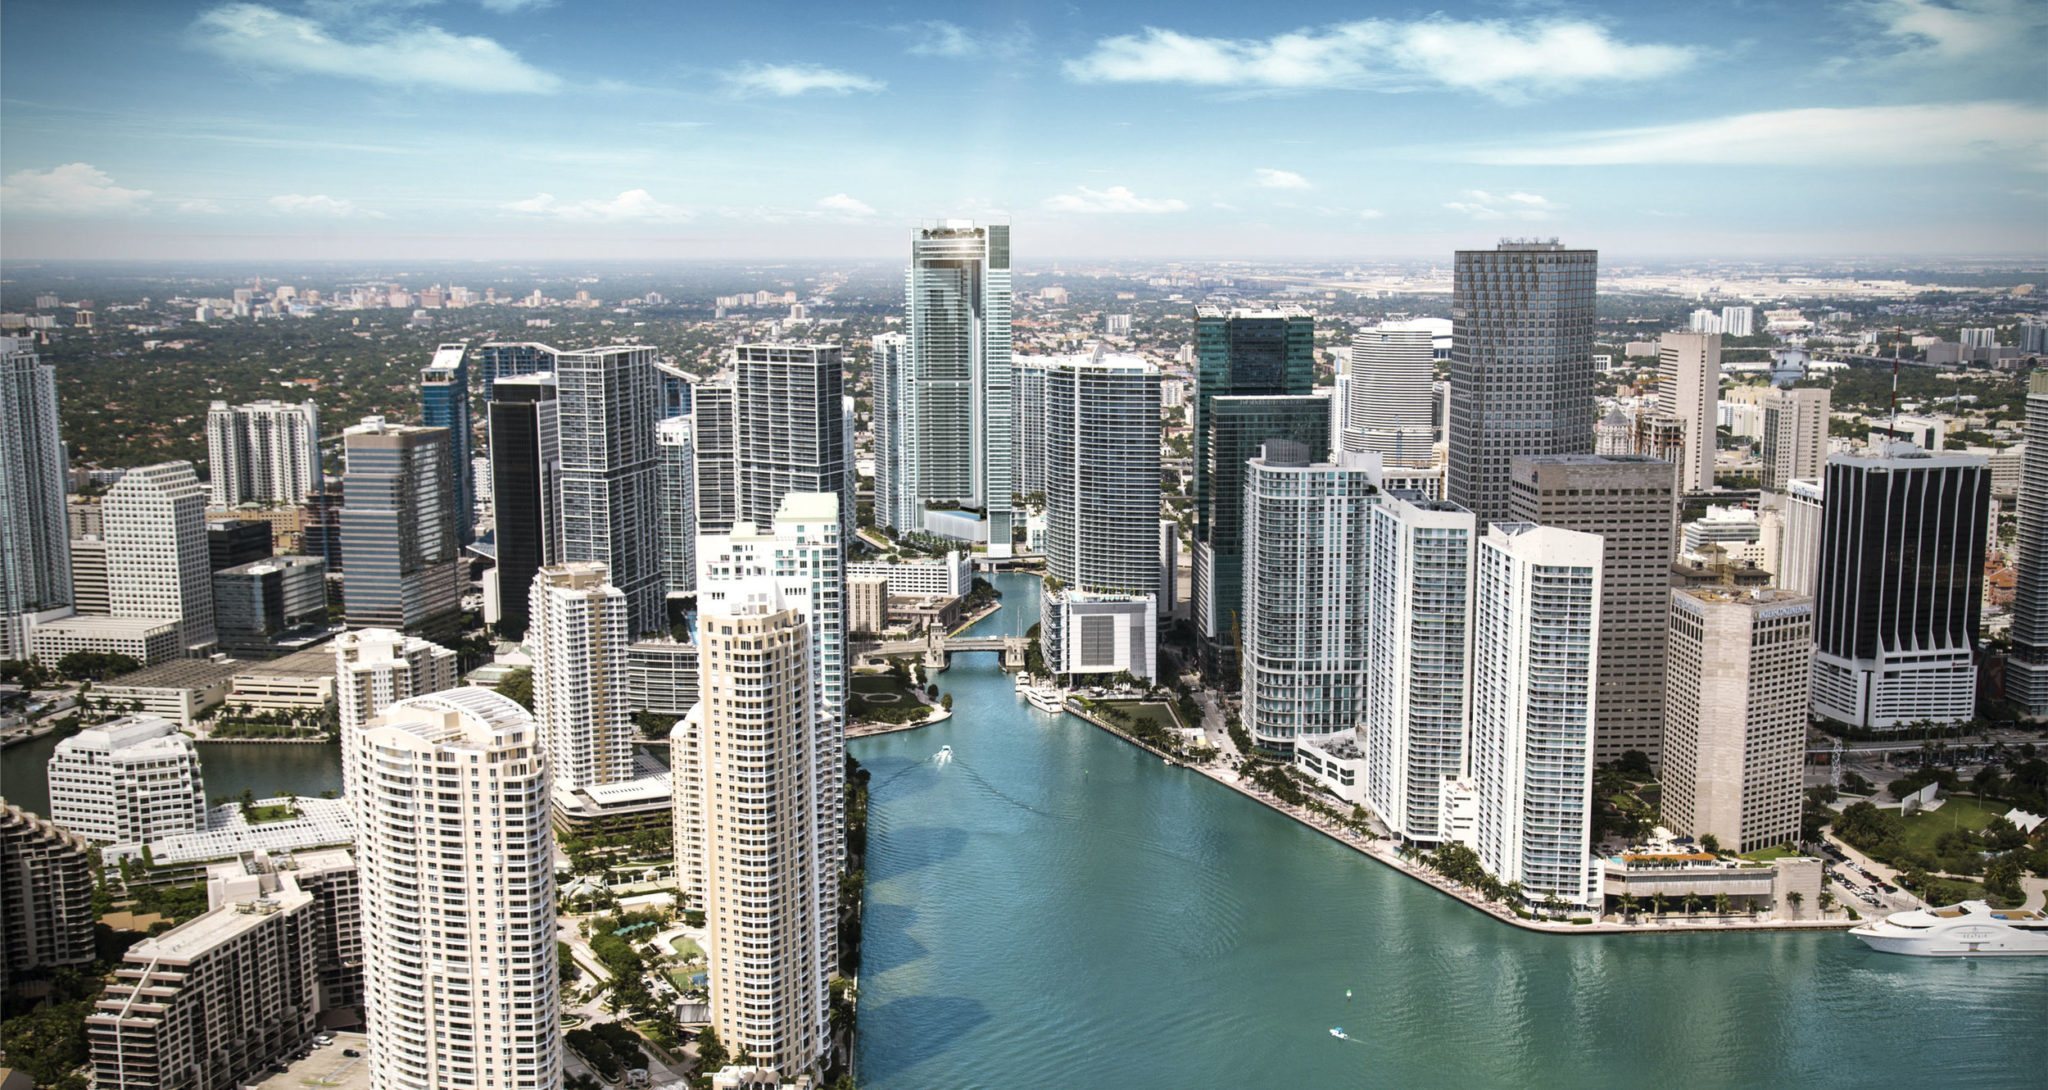 The Miami River: Teeming with Development